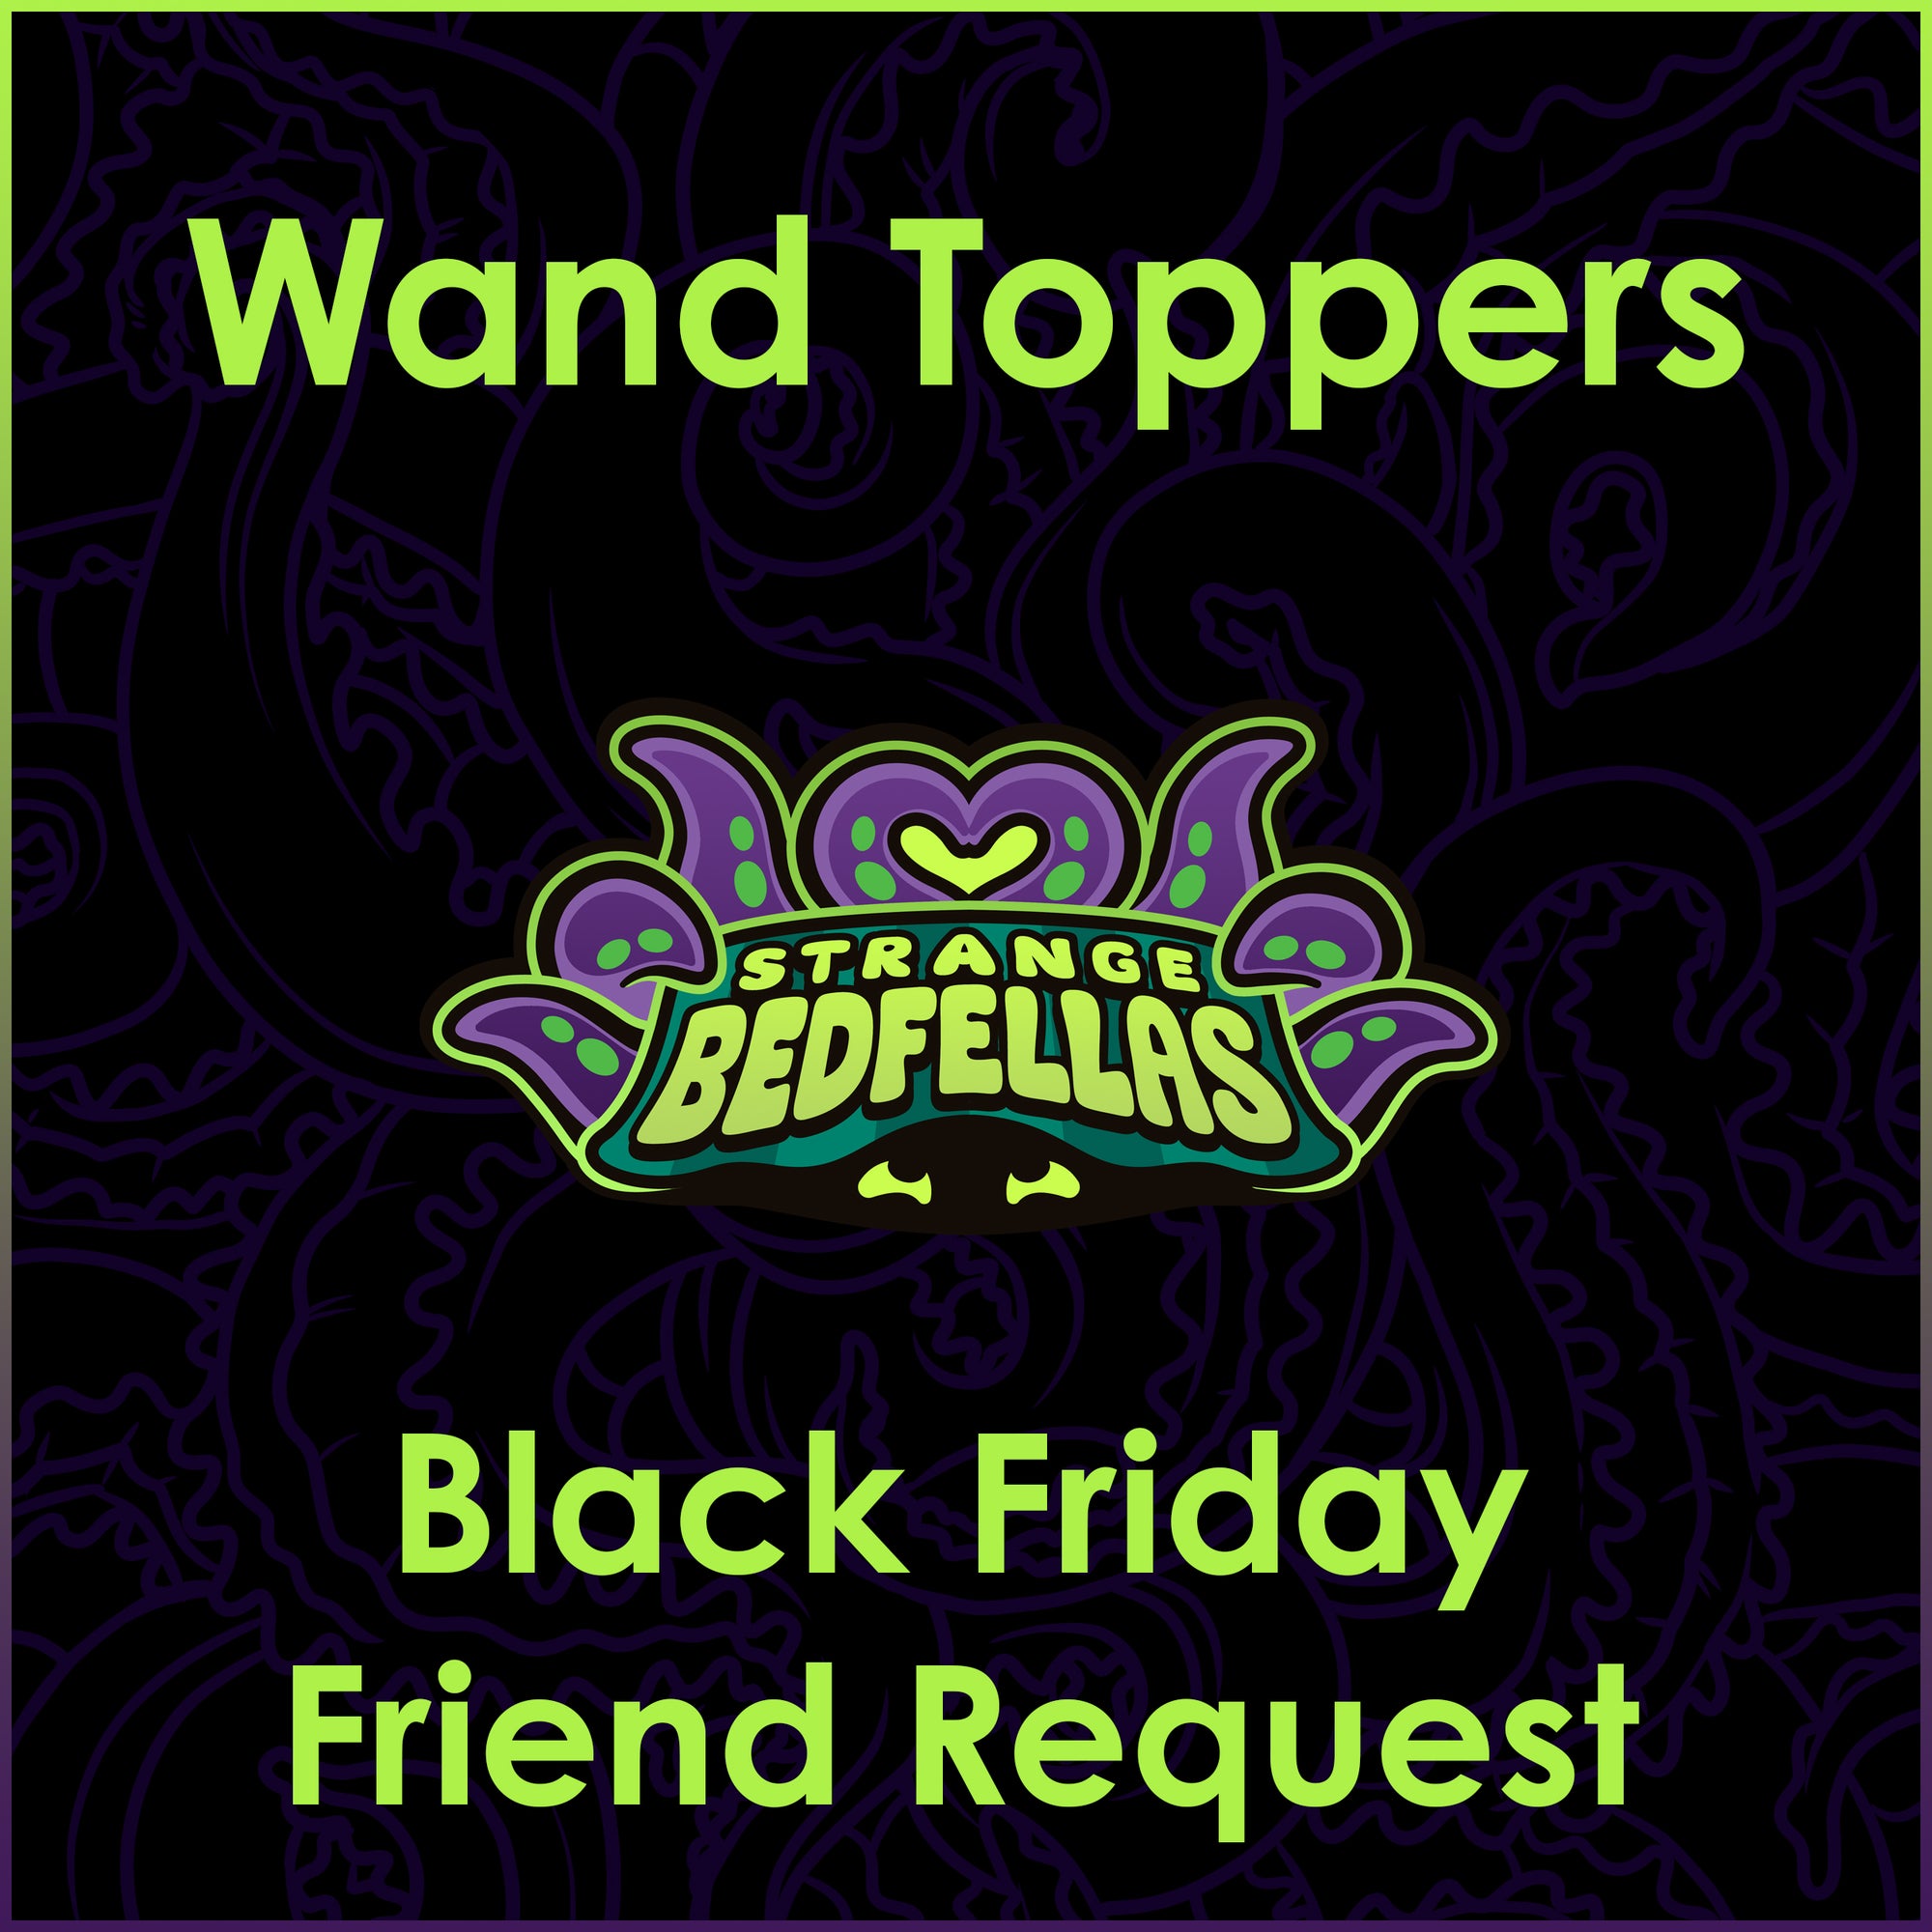 Black Friday Friend Request -- Wand Toppers